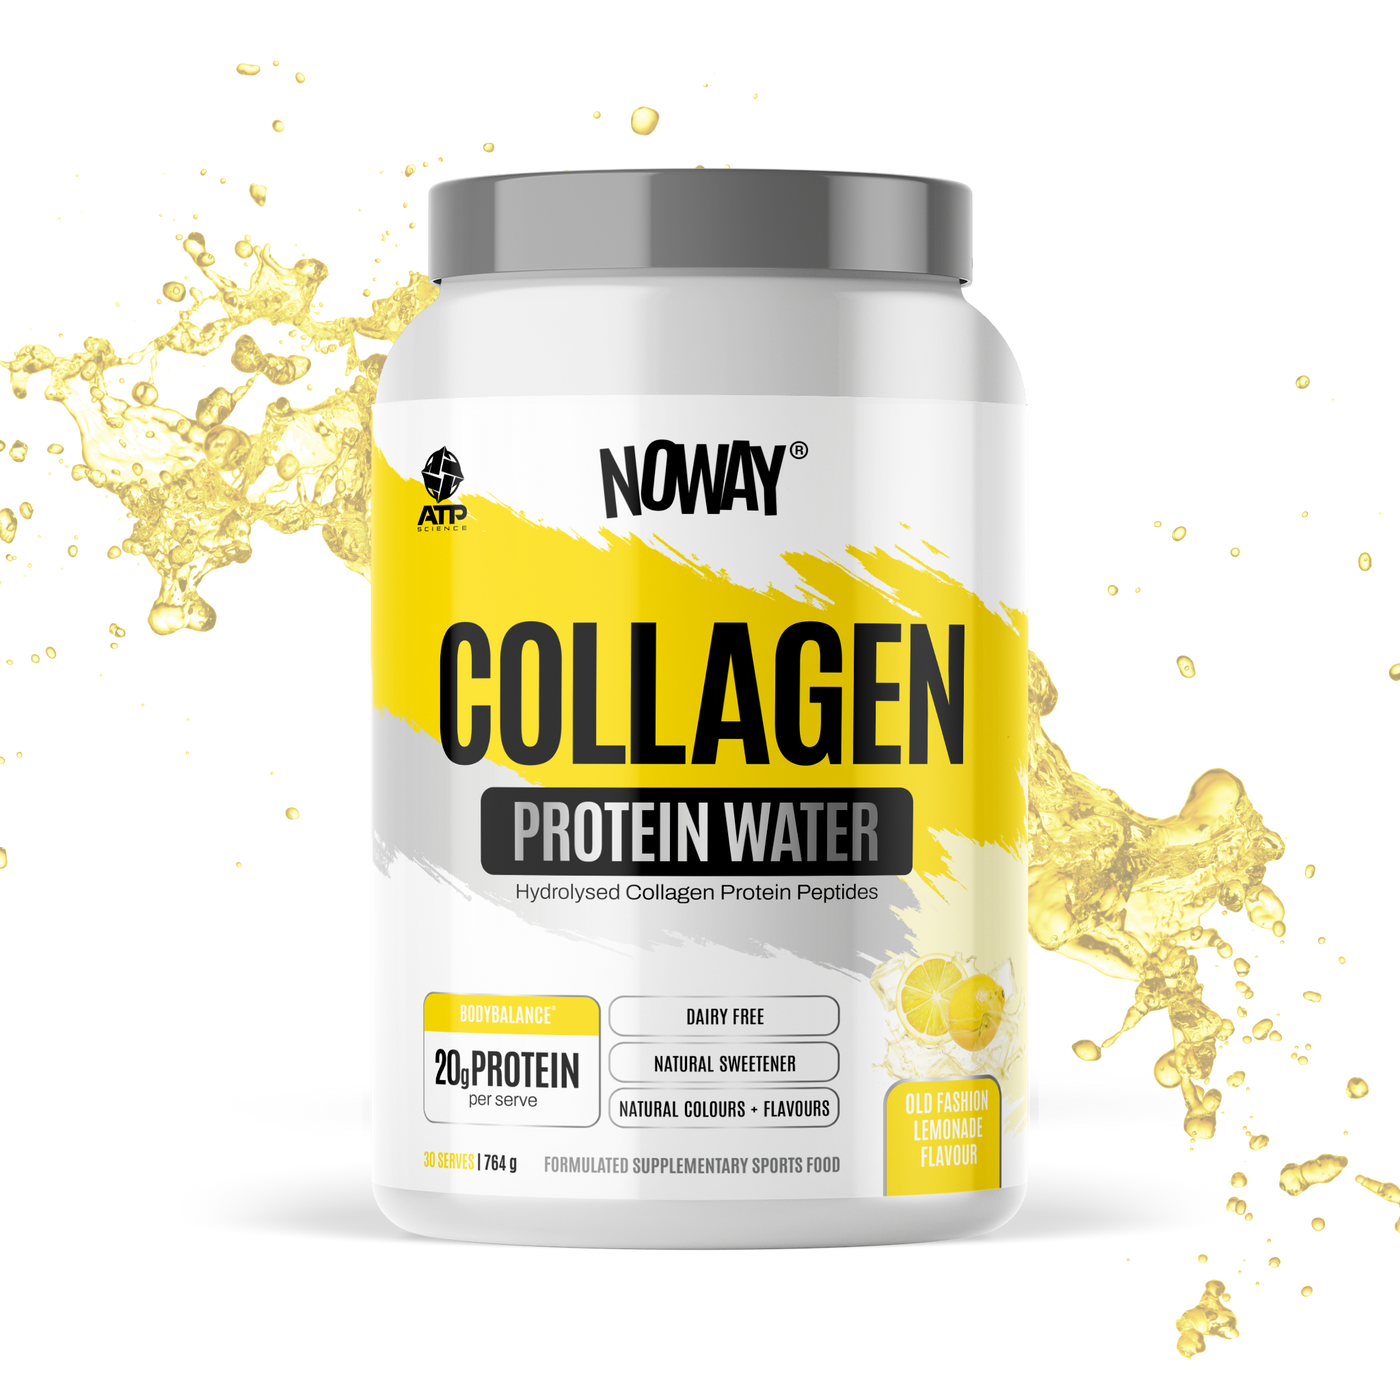 Noway Collagen Protein Water - Old Fashioned Lemonade